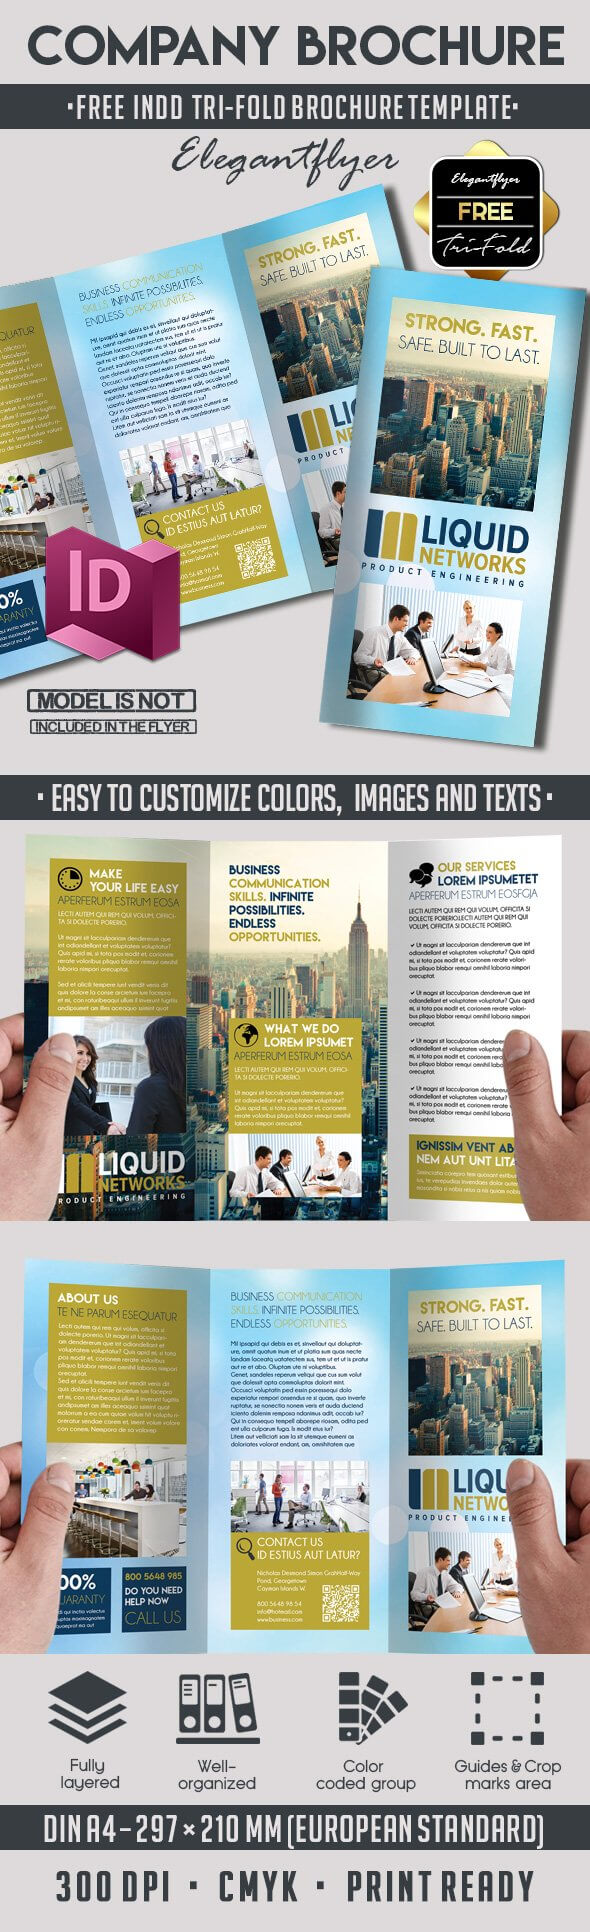 templates for indesign brochures cc 2015